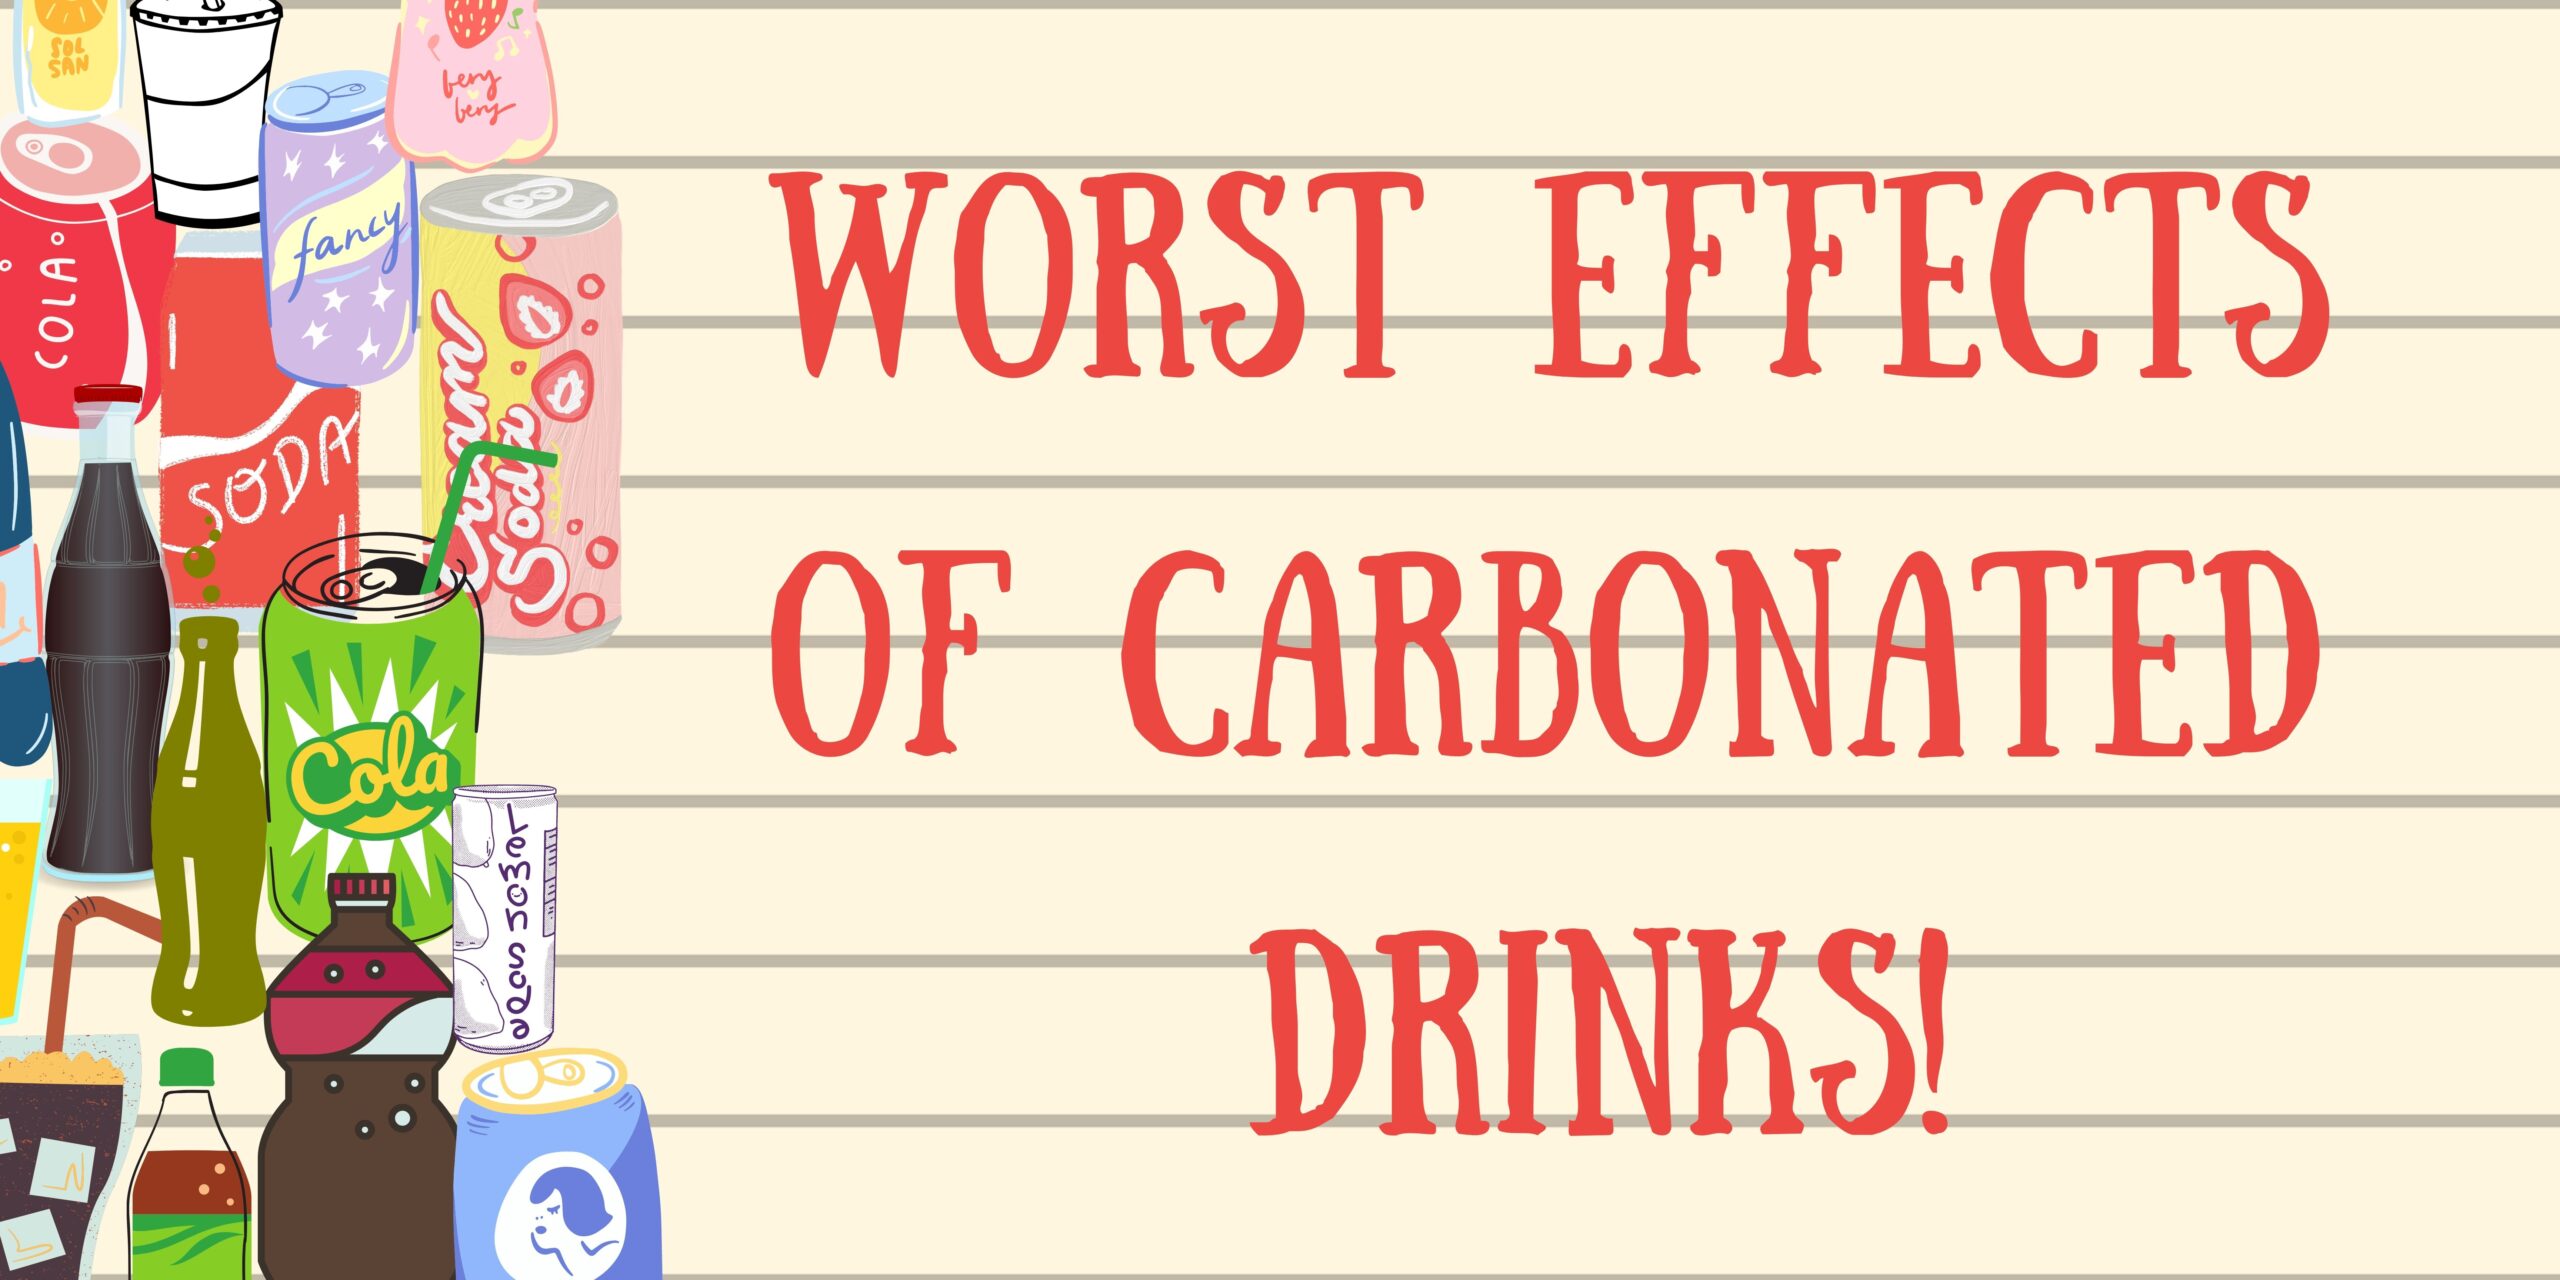 Worst effects of Carbonated Drinks!